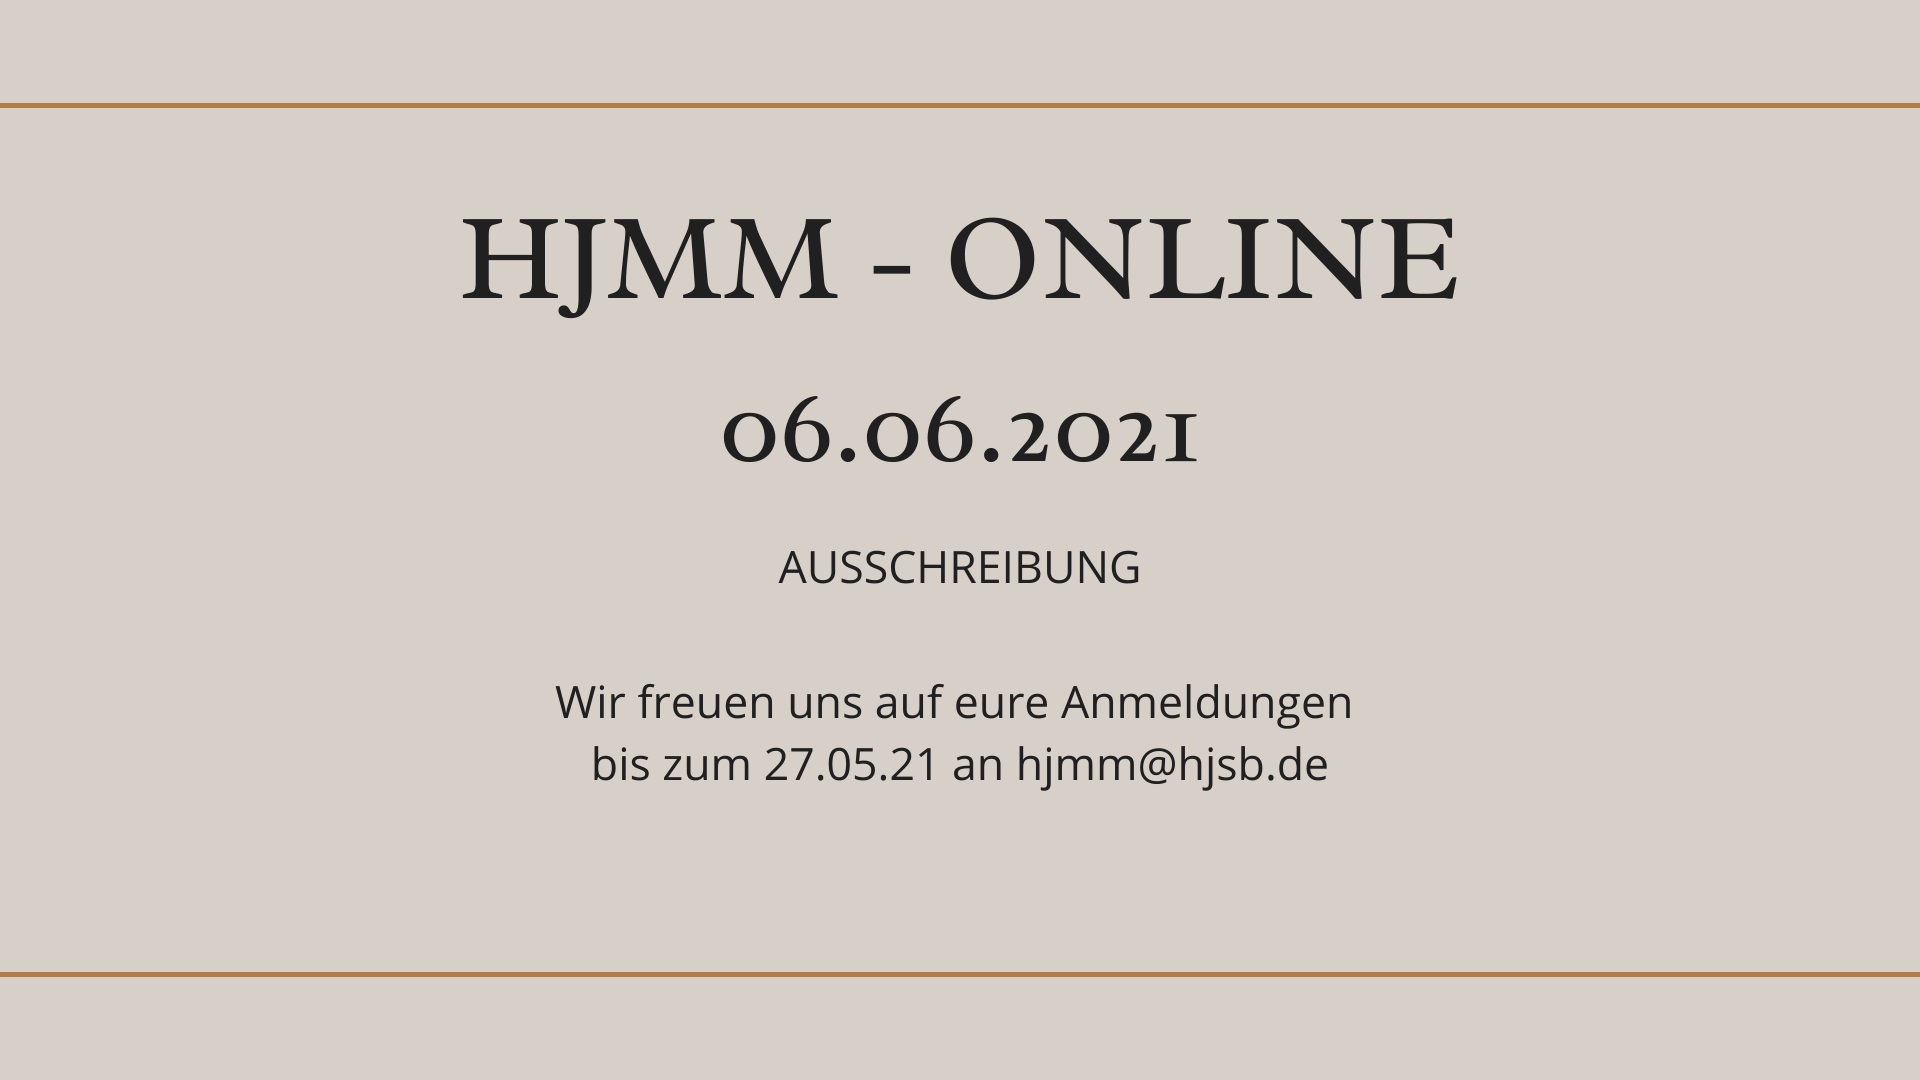 You are currently viewing ONLINE-HJMM 2021 – Ausschreibung